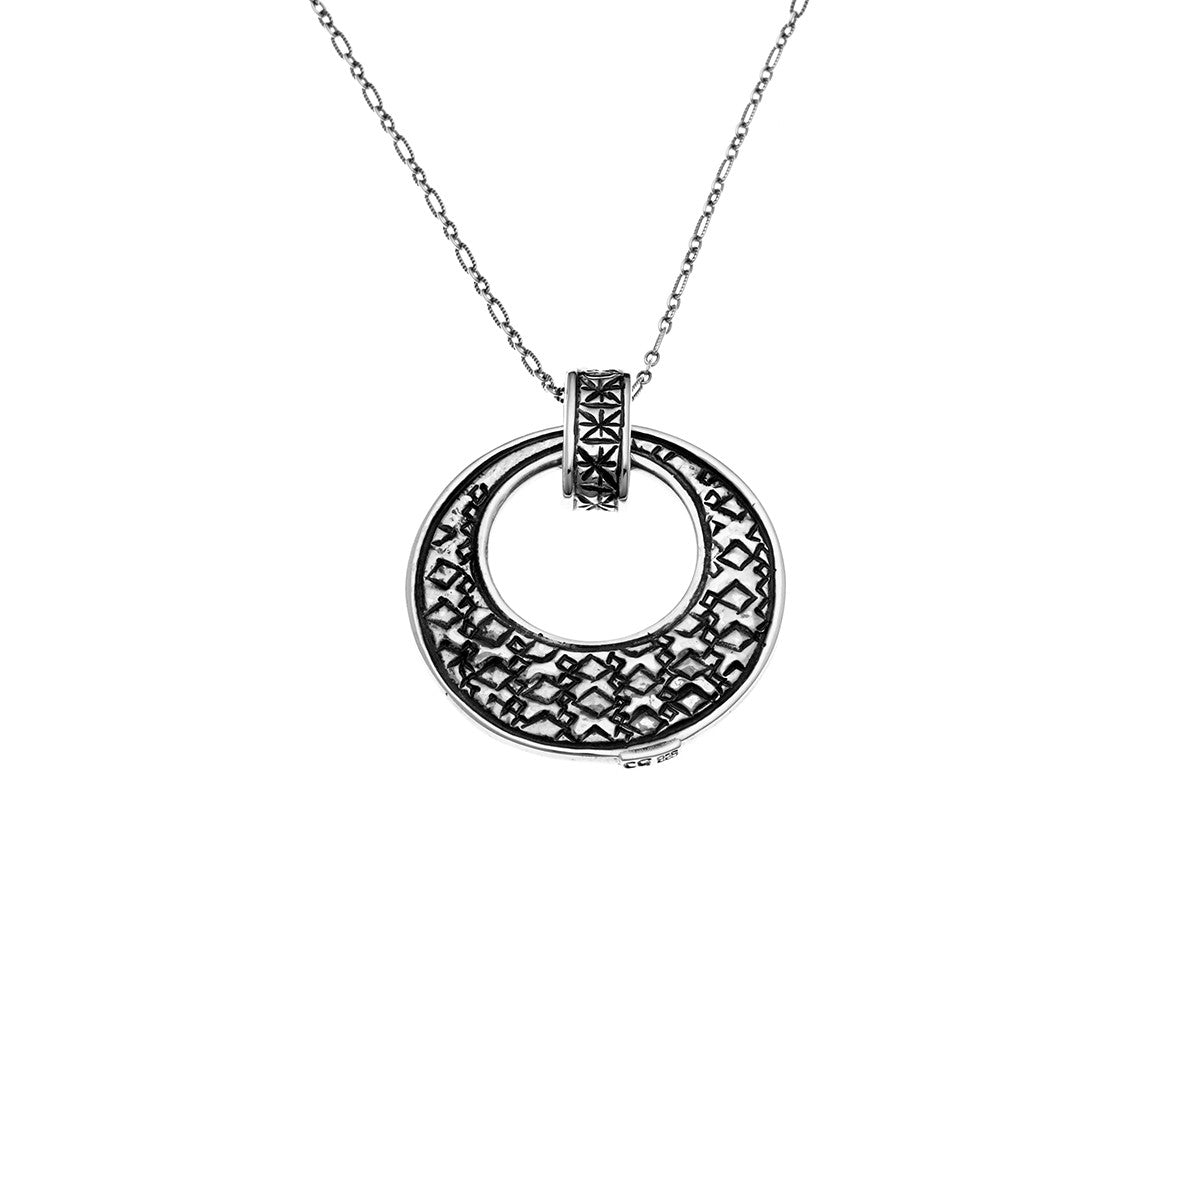 Wiener Werkstatte Reversible Circle Necklace - Cynthia Gale New York Jewelry